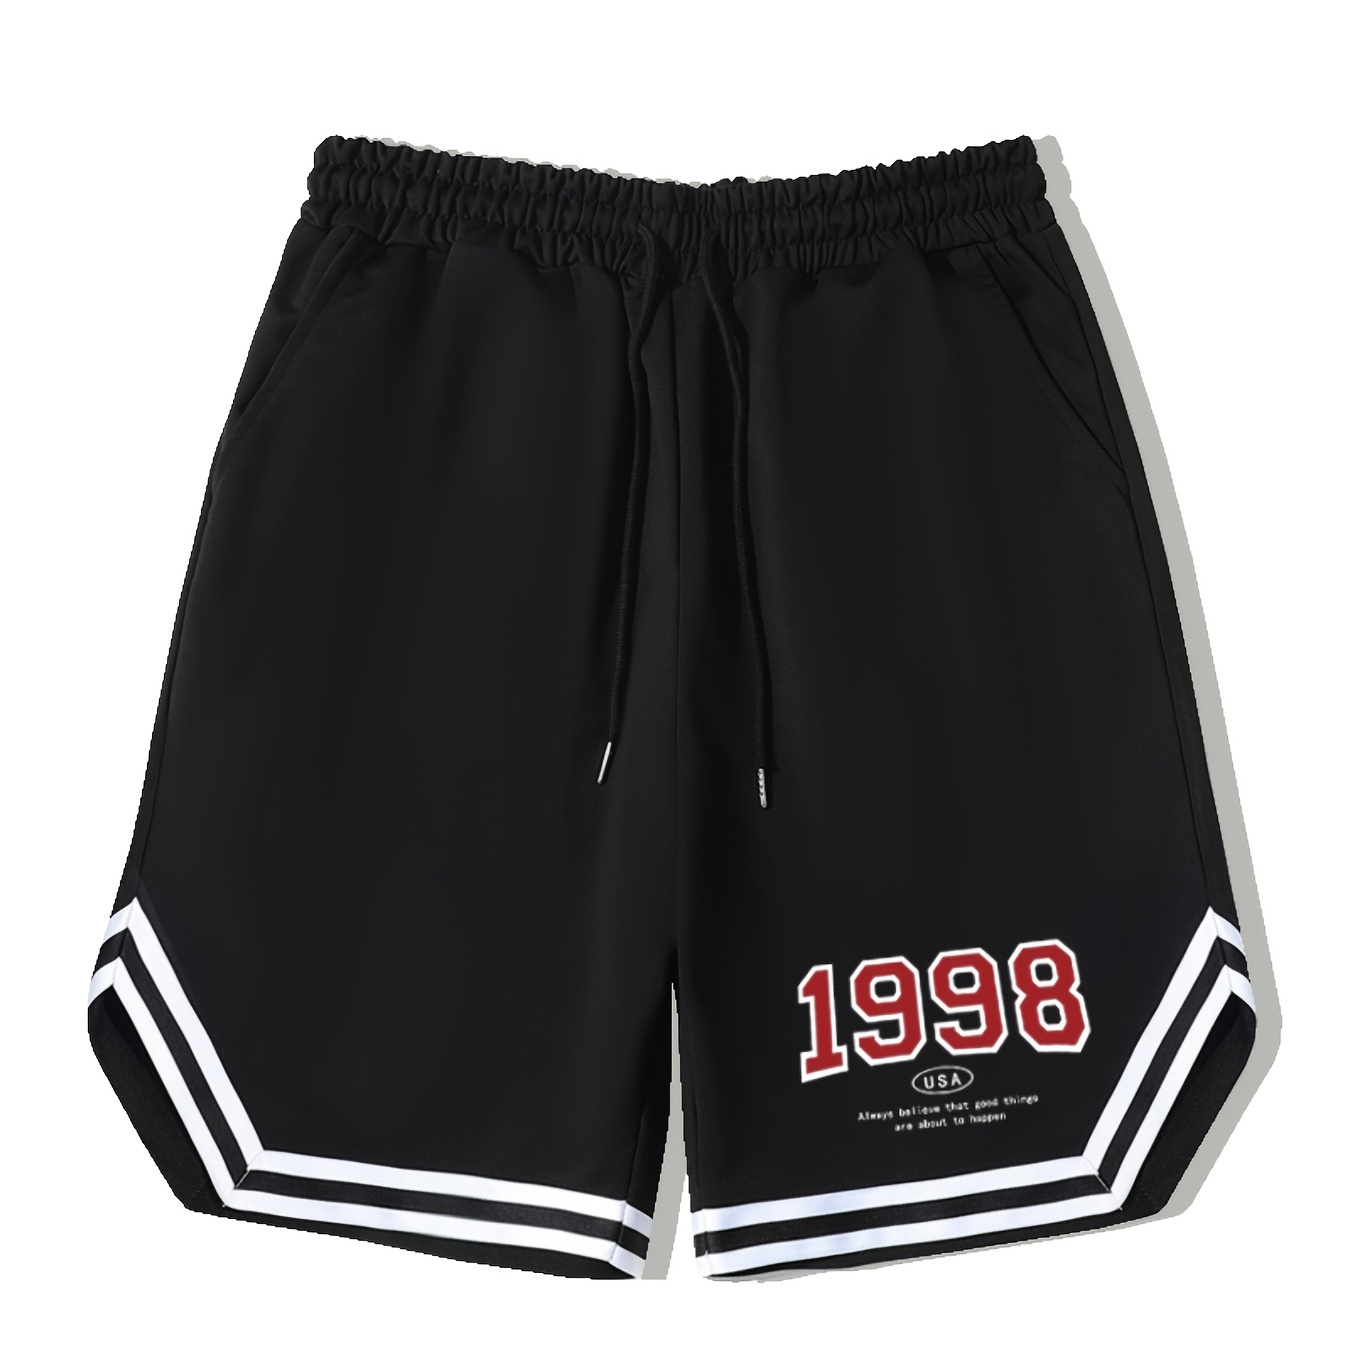 

Men's Basketball Short With 1998 Printed, Casual Old-school Printed Slight Stretch Shorts For Summer Outdoor Sports